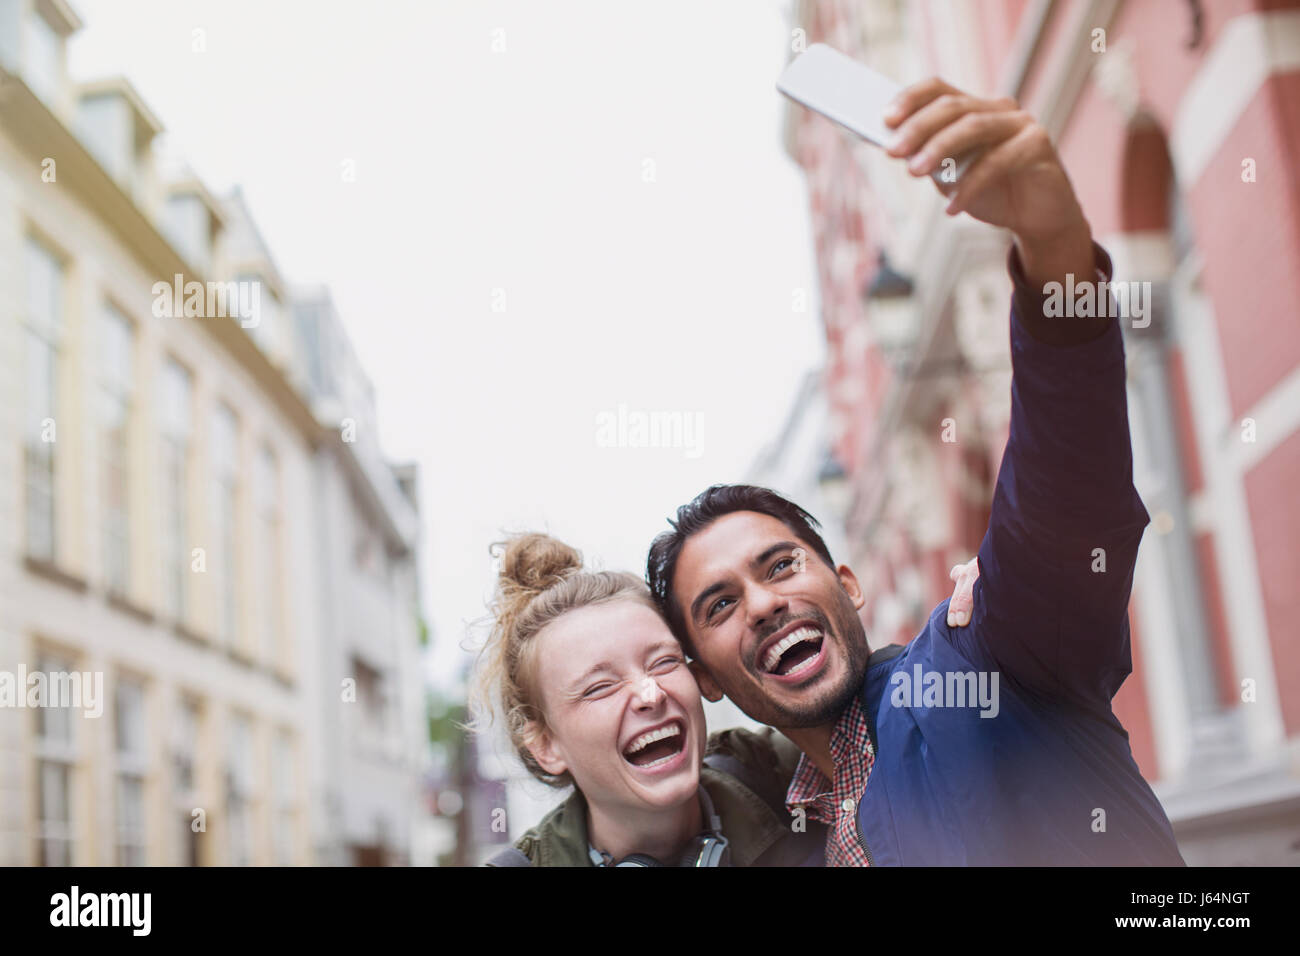 Enthusiastic, laughing young couple taking selfie in city Stock Photo